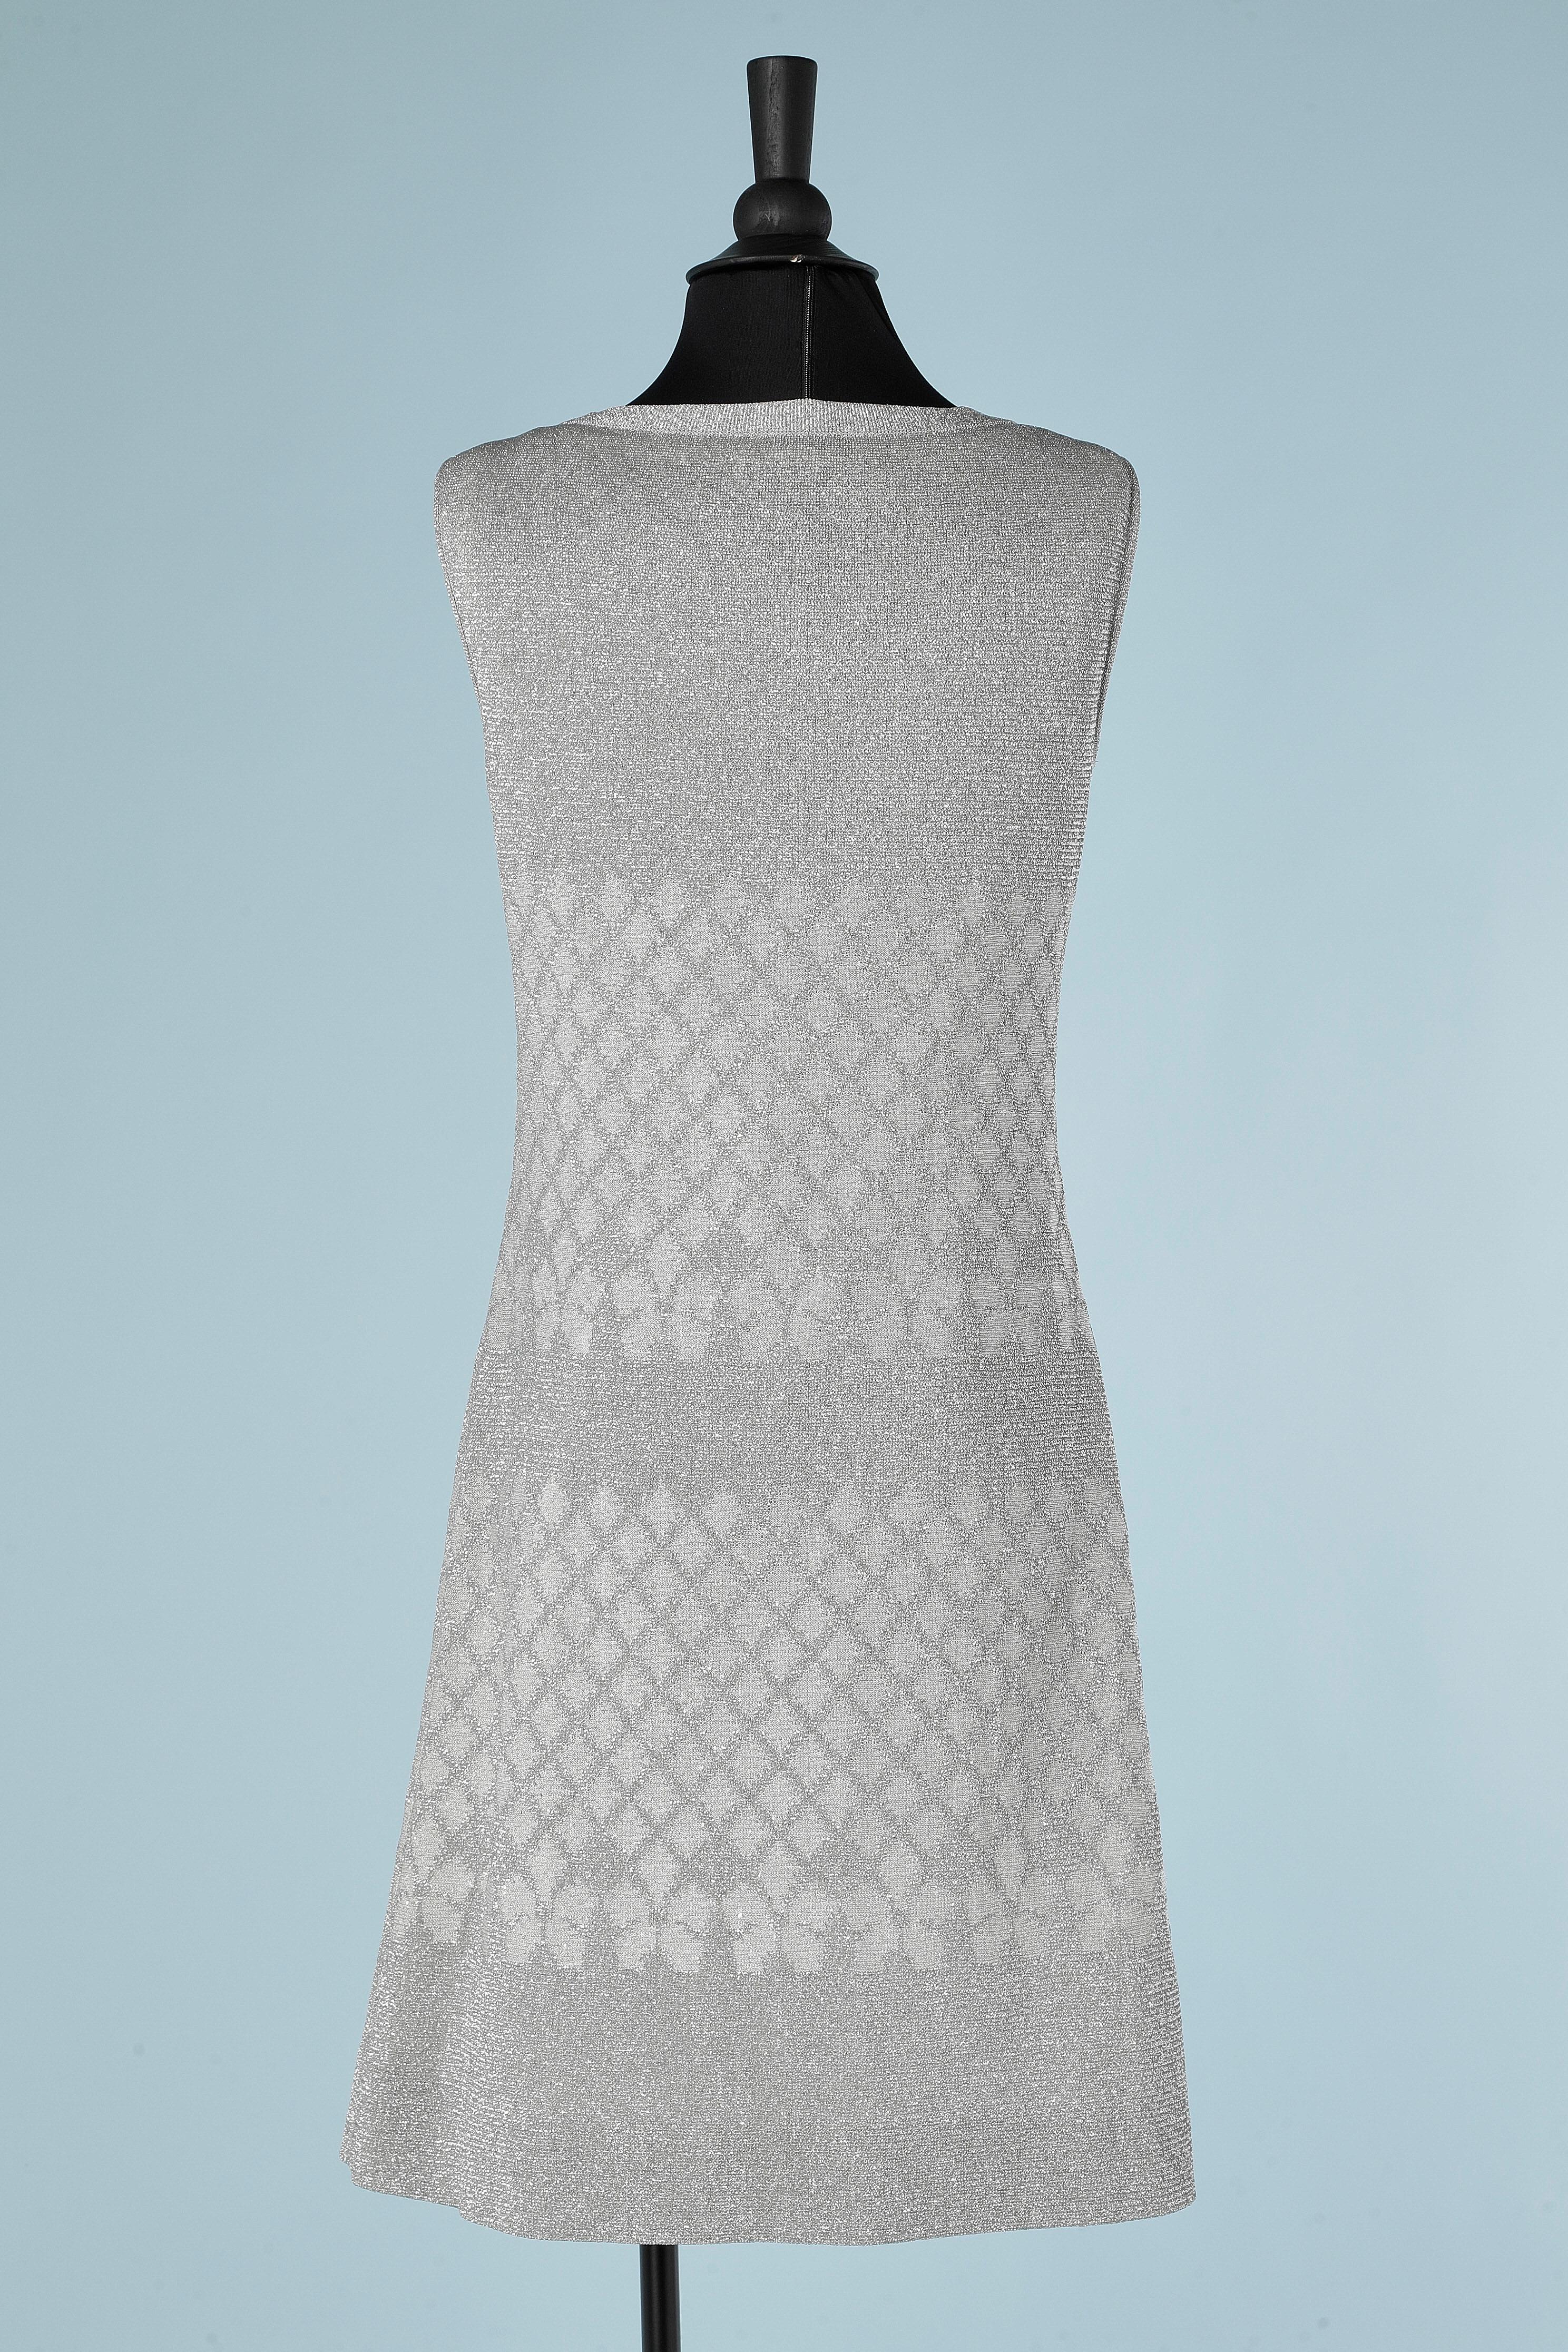 Sleeveless cocktail dress in silver lurex knit Pierre Balmain Les Tricots  For Sale 1